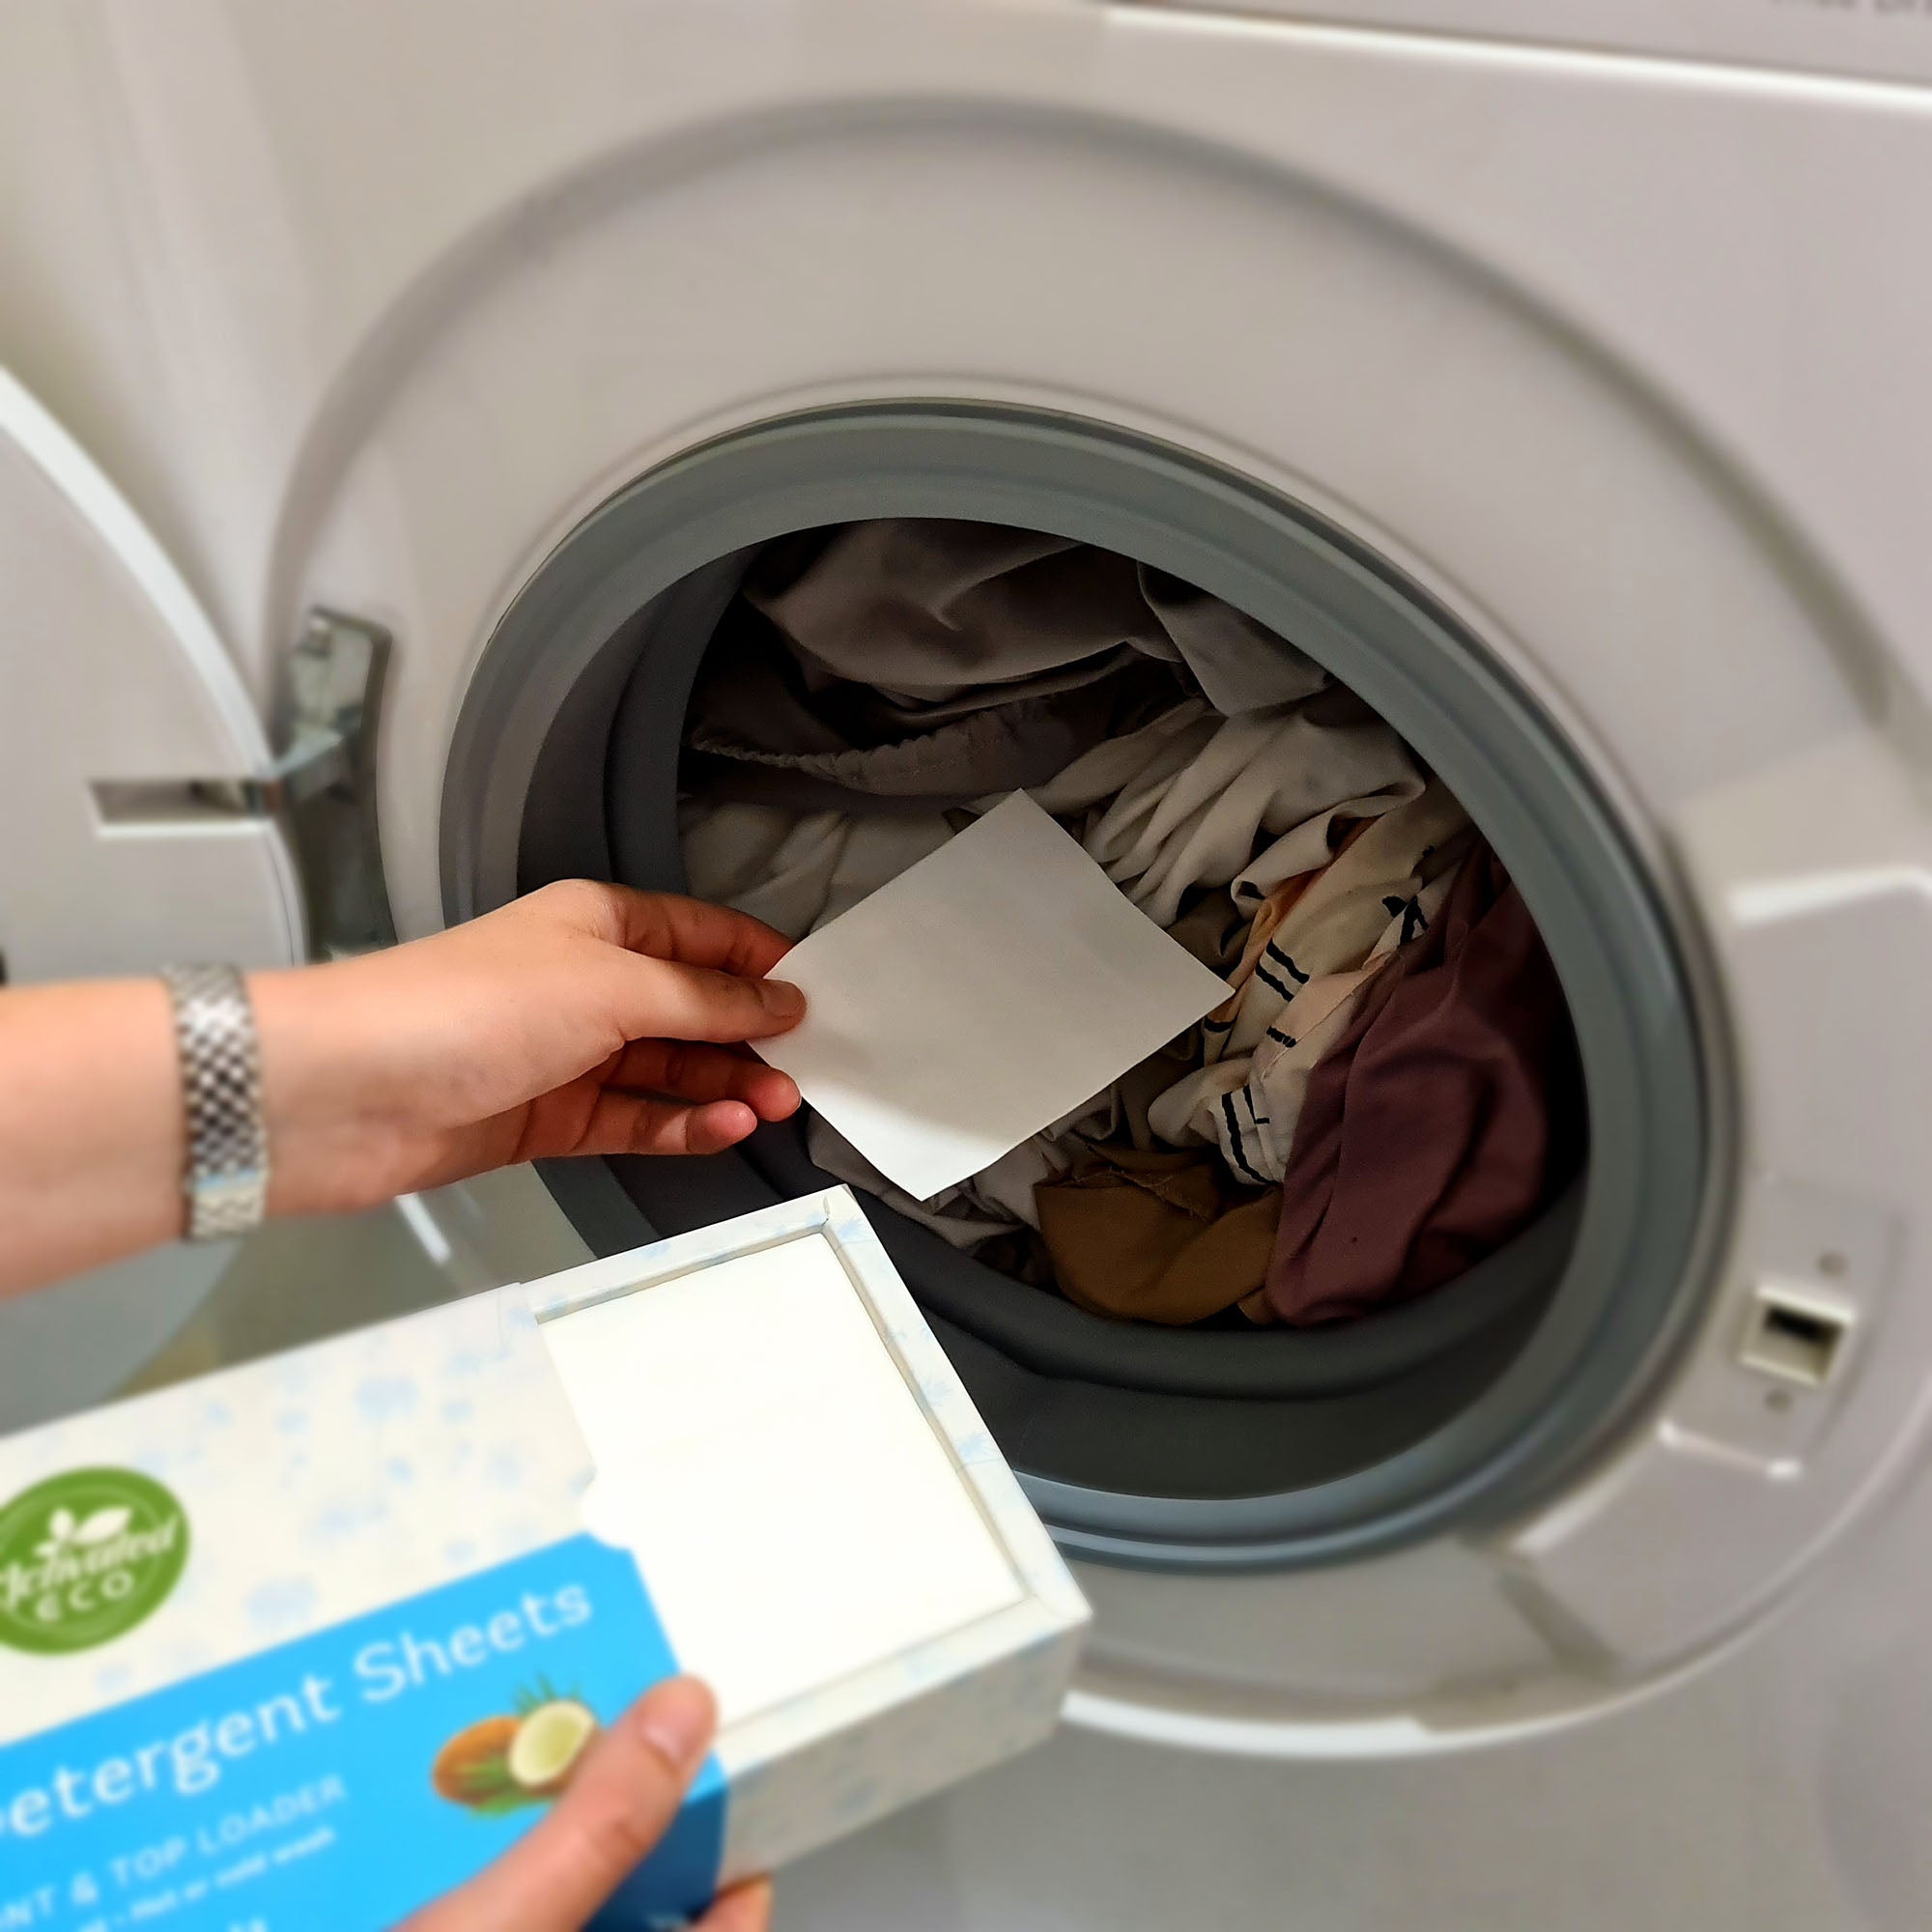 Are Laundry Detergent Sheets Better for Your Washing Machine